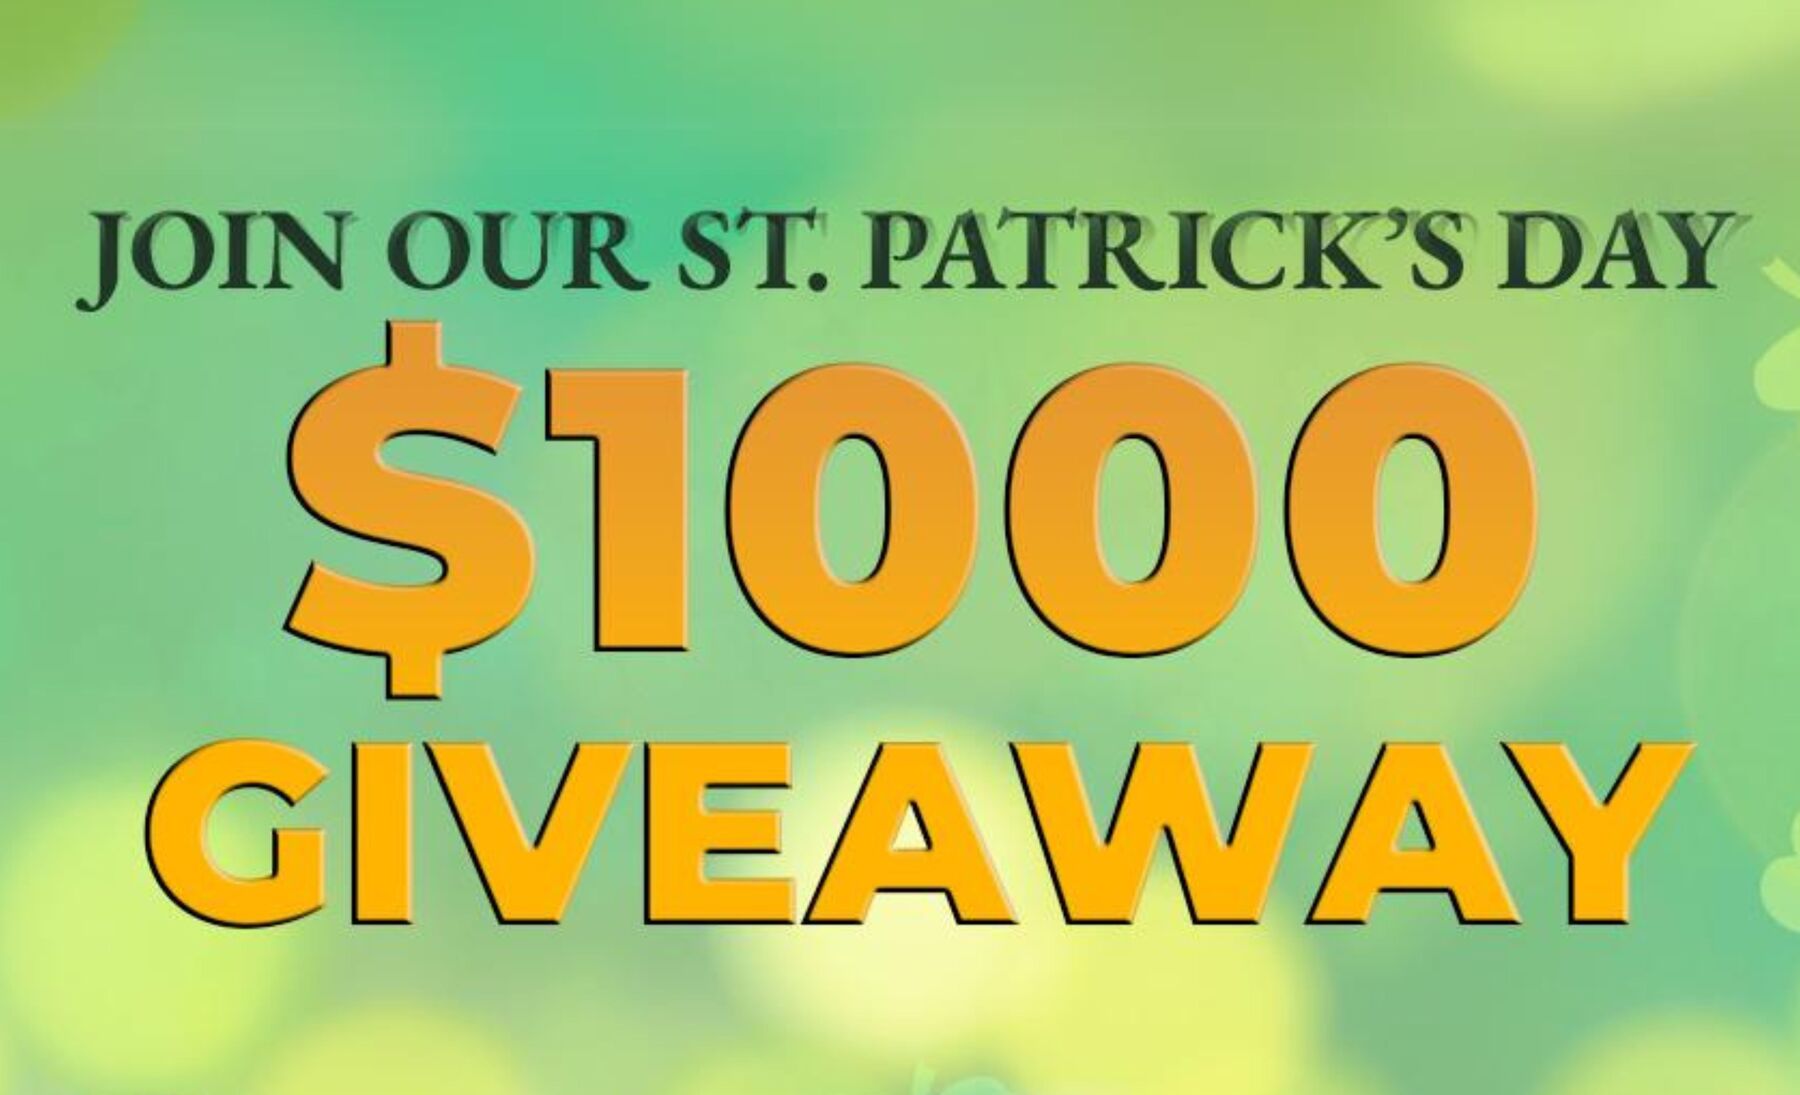 Win Big with Celtic Knot's St. Patrick's Day Giveaway: Celebrate & Sparkle!